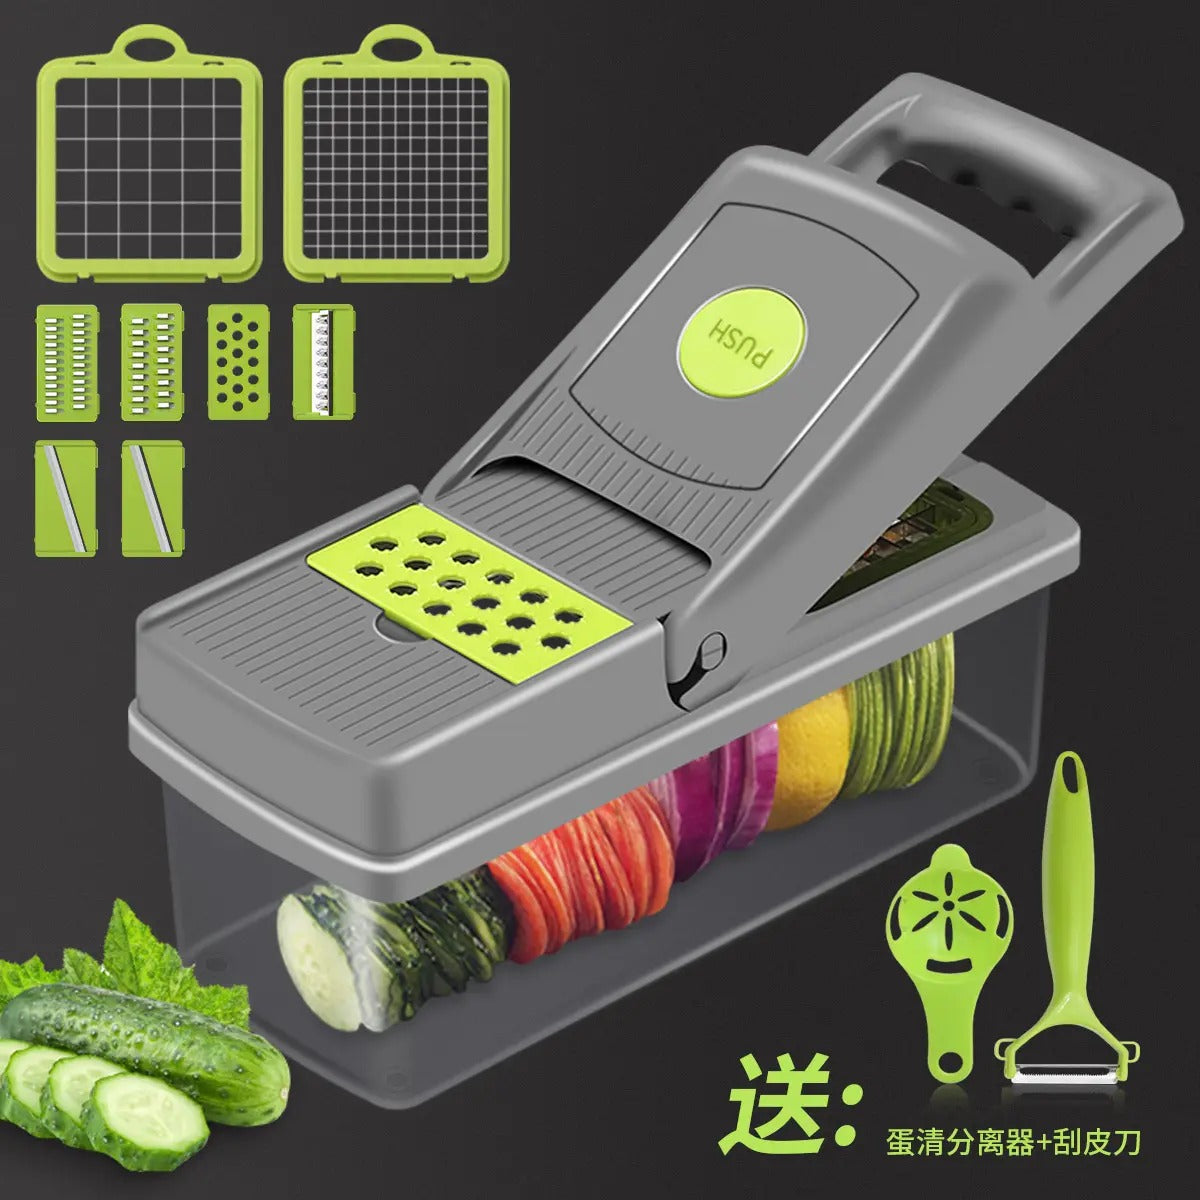 Hot Selling 12 In 1 Hand Held Multifunctional Onion Cutter Fruits Slicer  Potatoes Peeler Manual Vegetable Chopper - Buy Hot Selling 12 In 1 Hand Held  Multifunctional Onion Cutter Fruits Slicer Potatoes